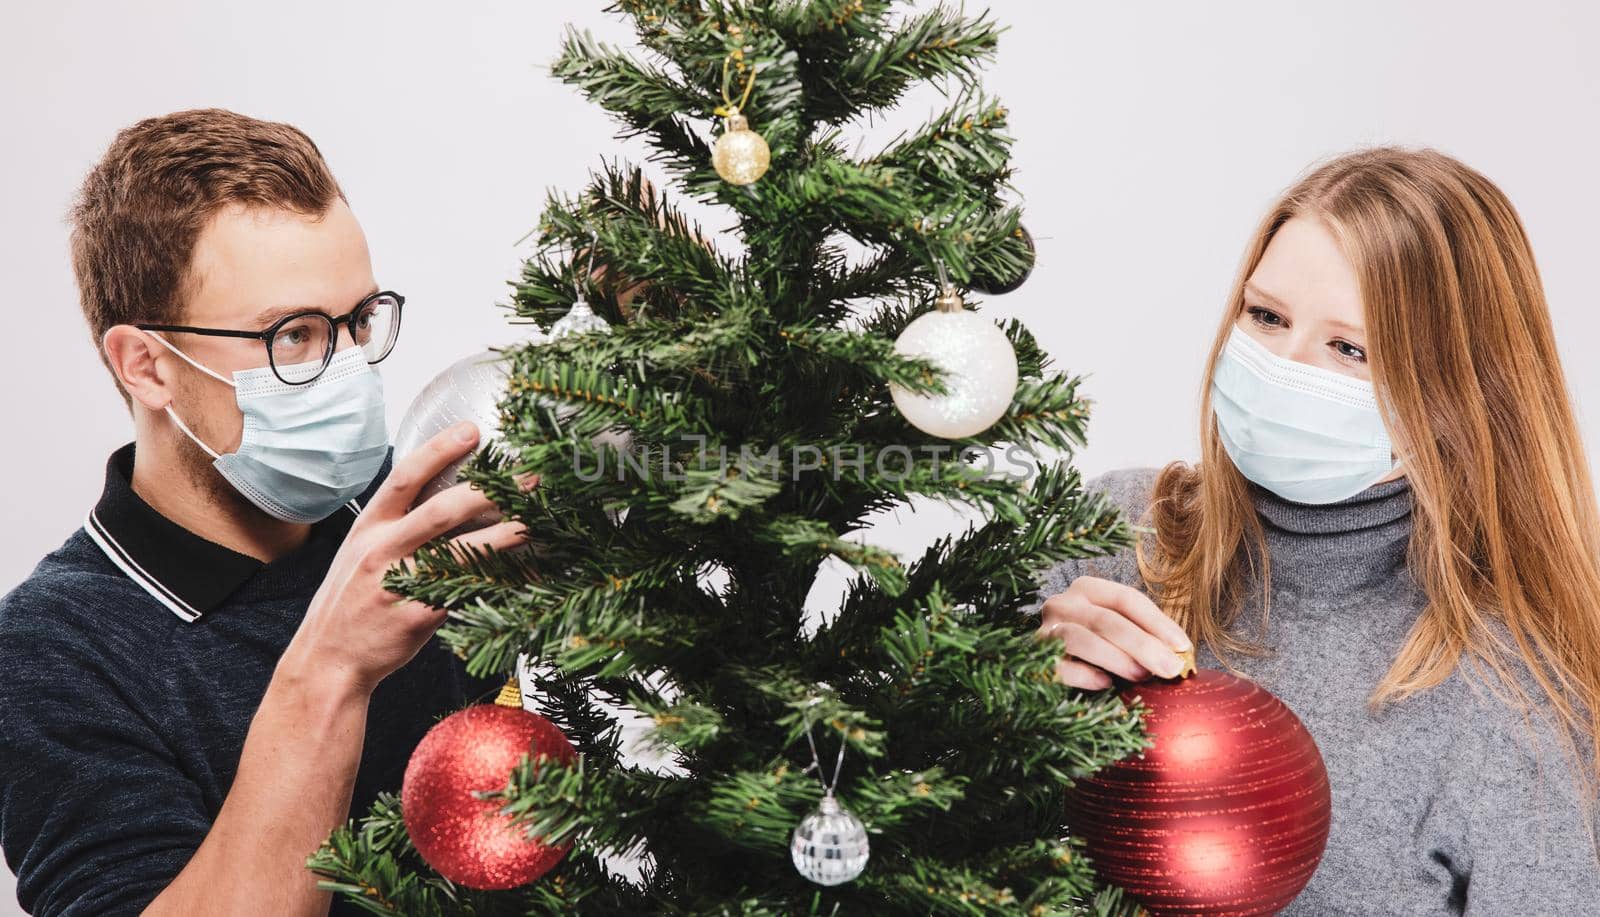 Couple decorating the Christmas tree with ornaments wearing covid-19 face mask